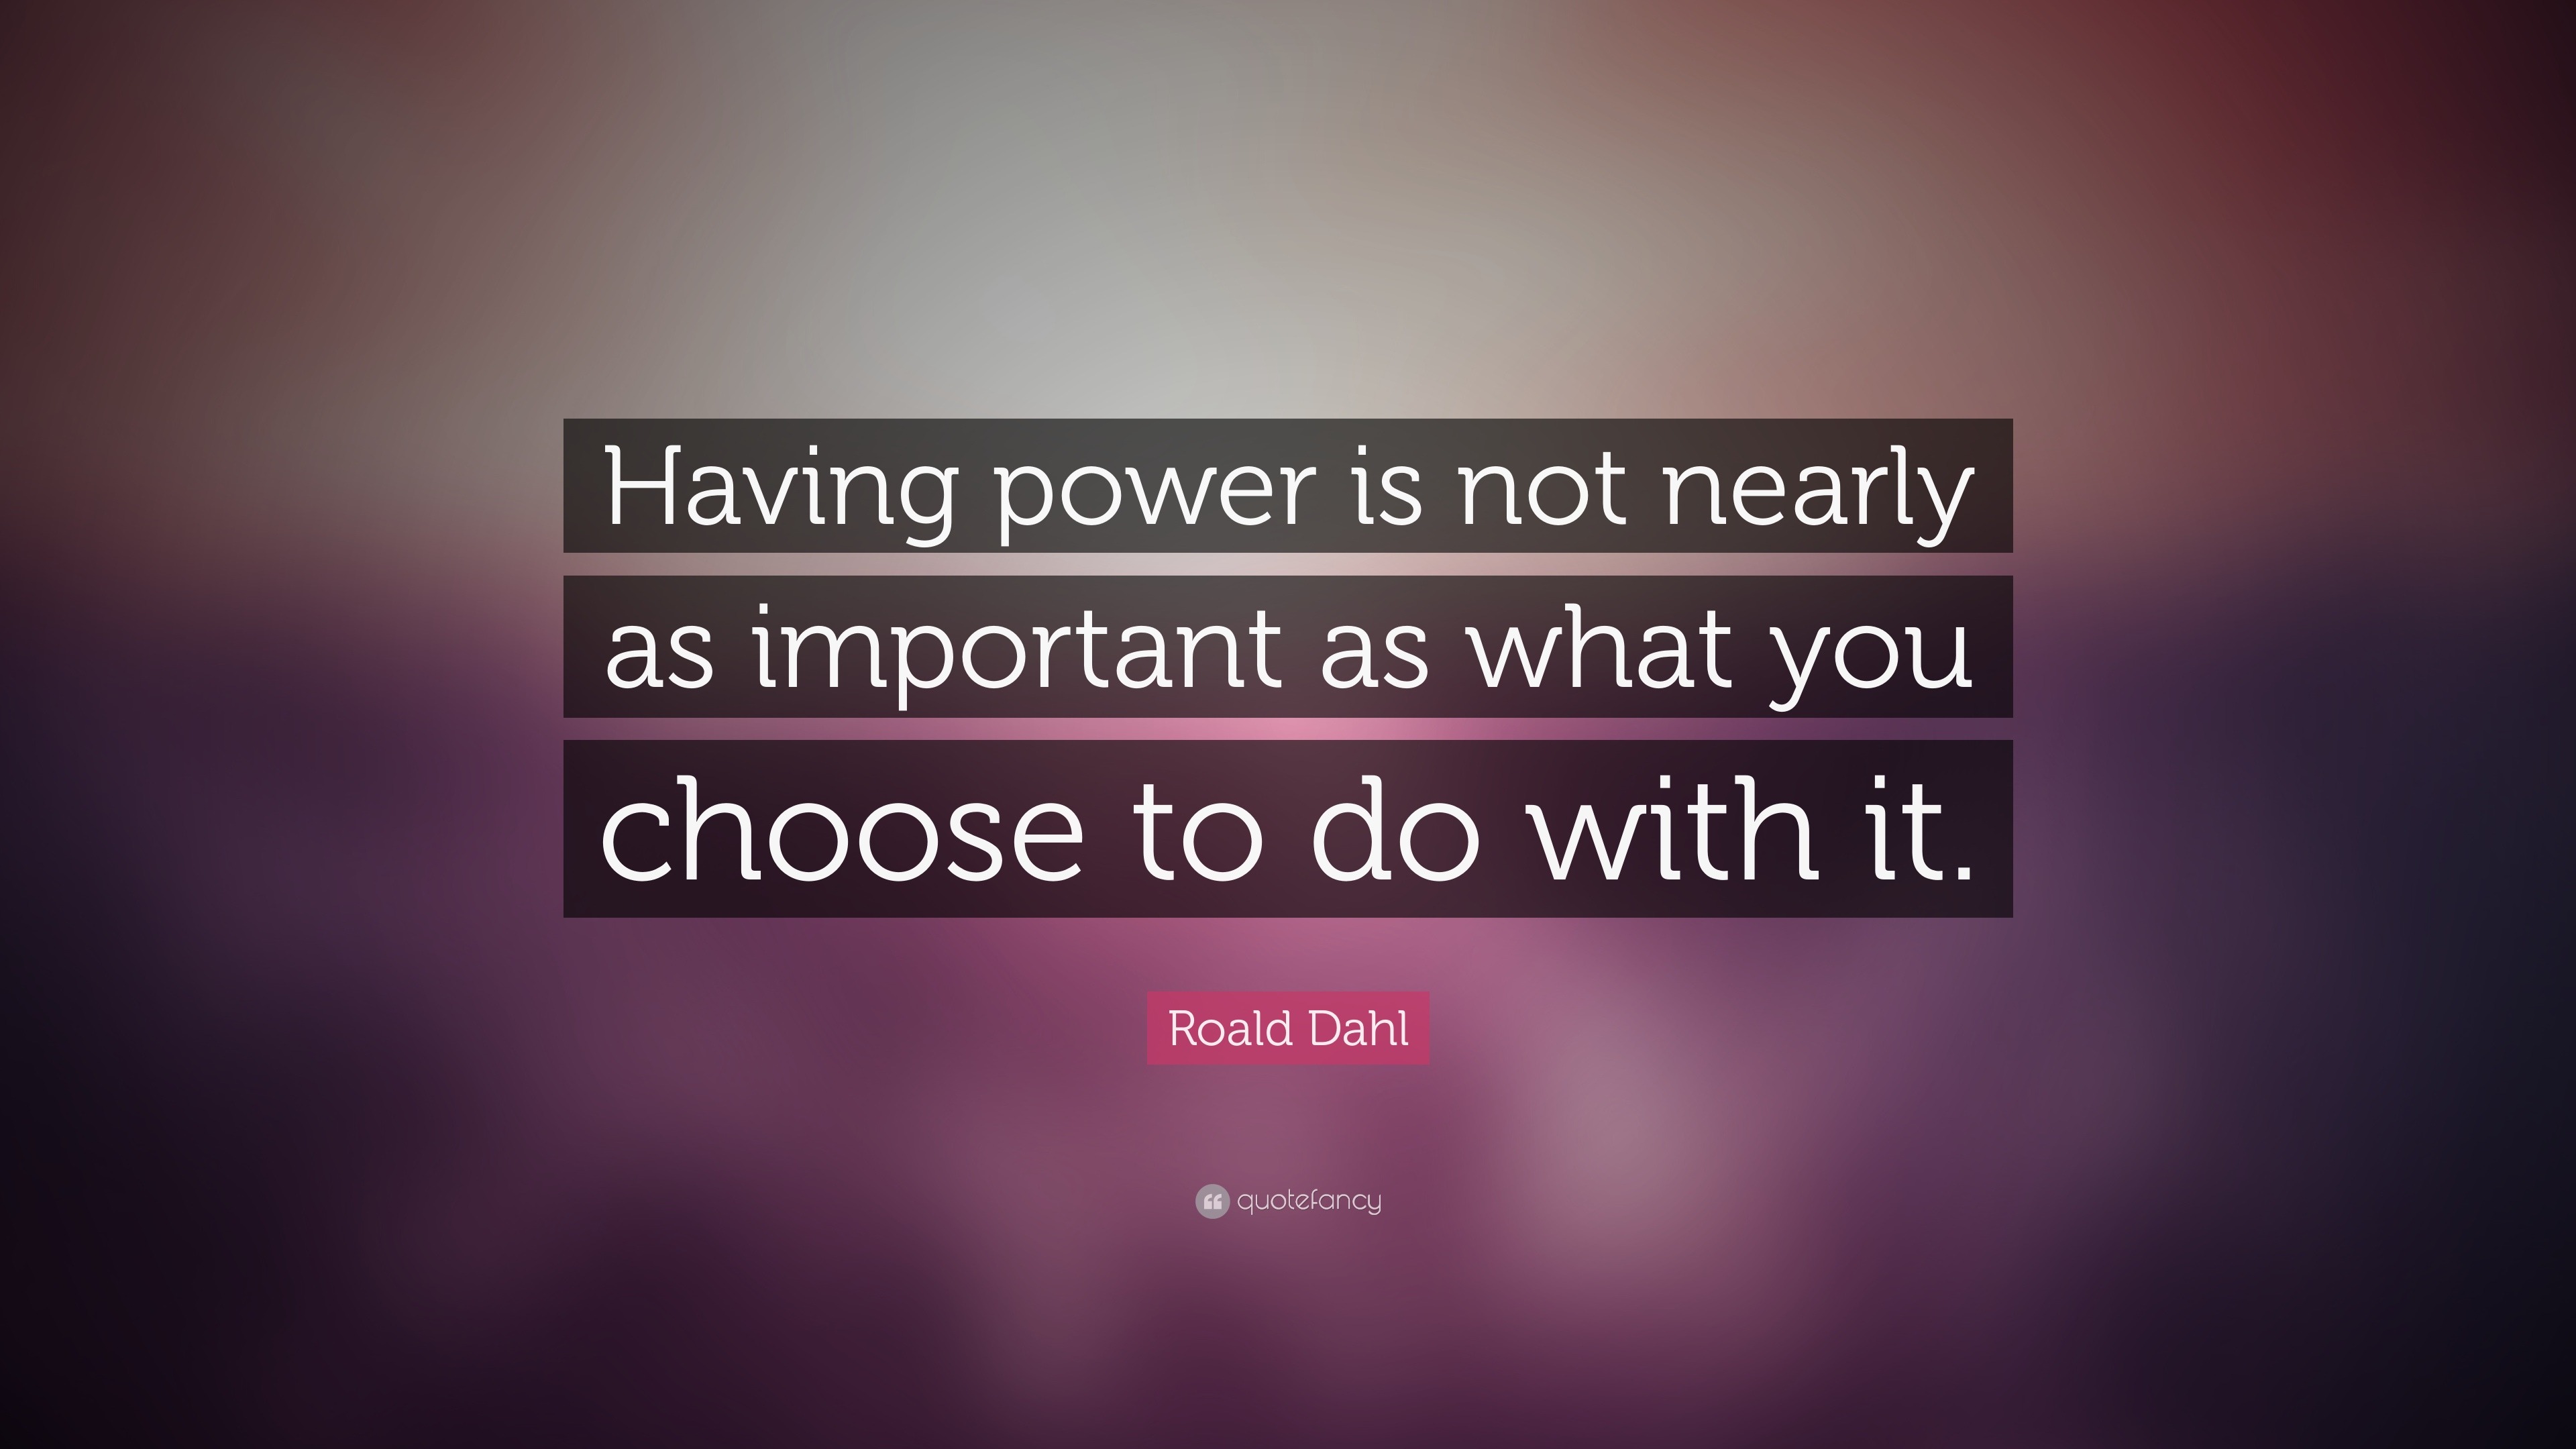 Roald Dahl Quote “Having power is not nearly as important